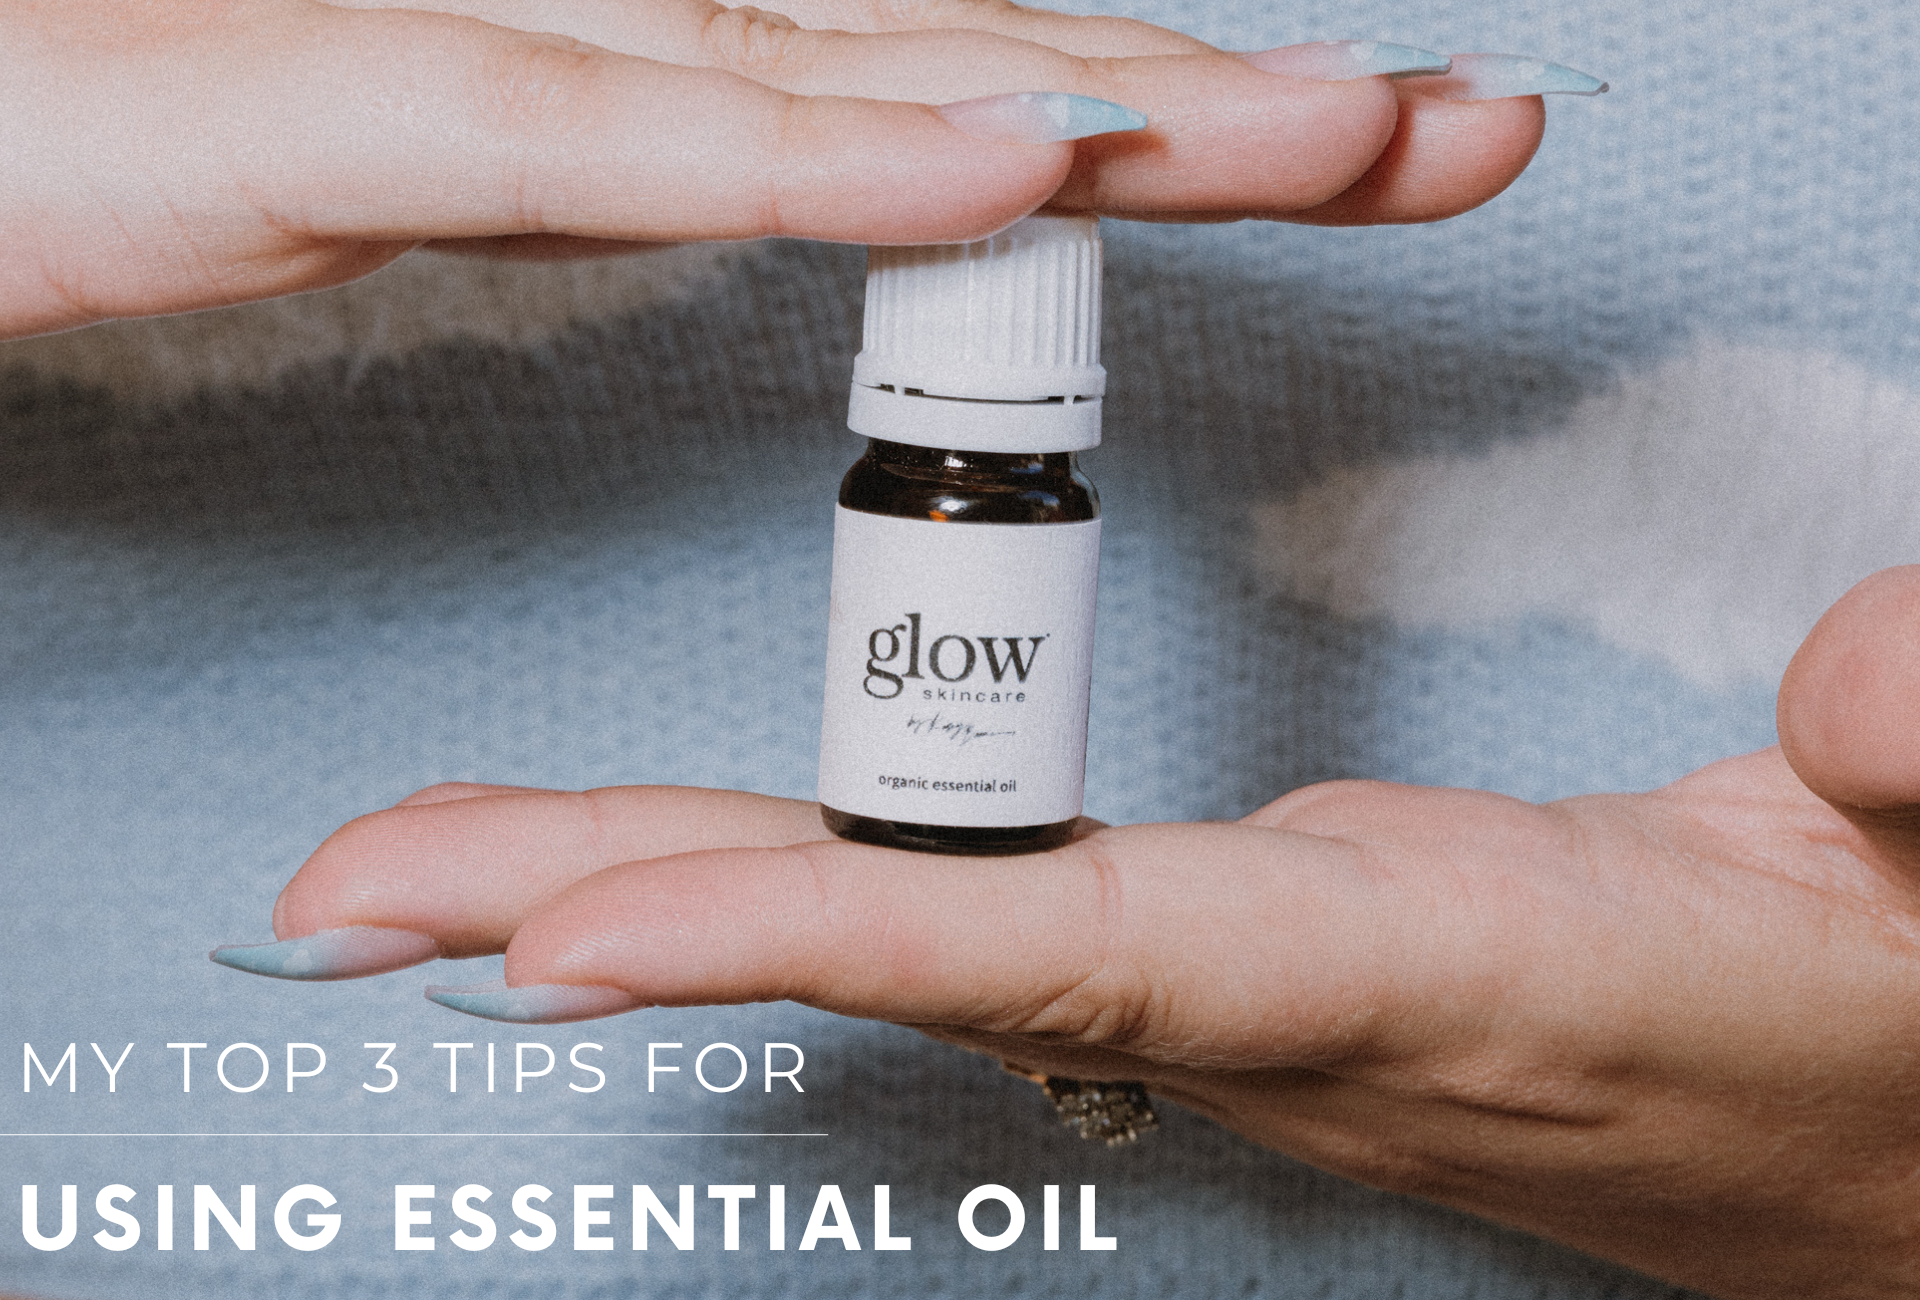 My Top 3 Tips for Using Essential Oil